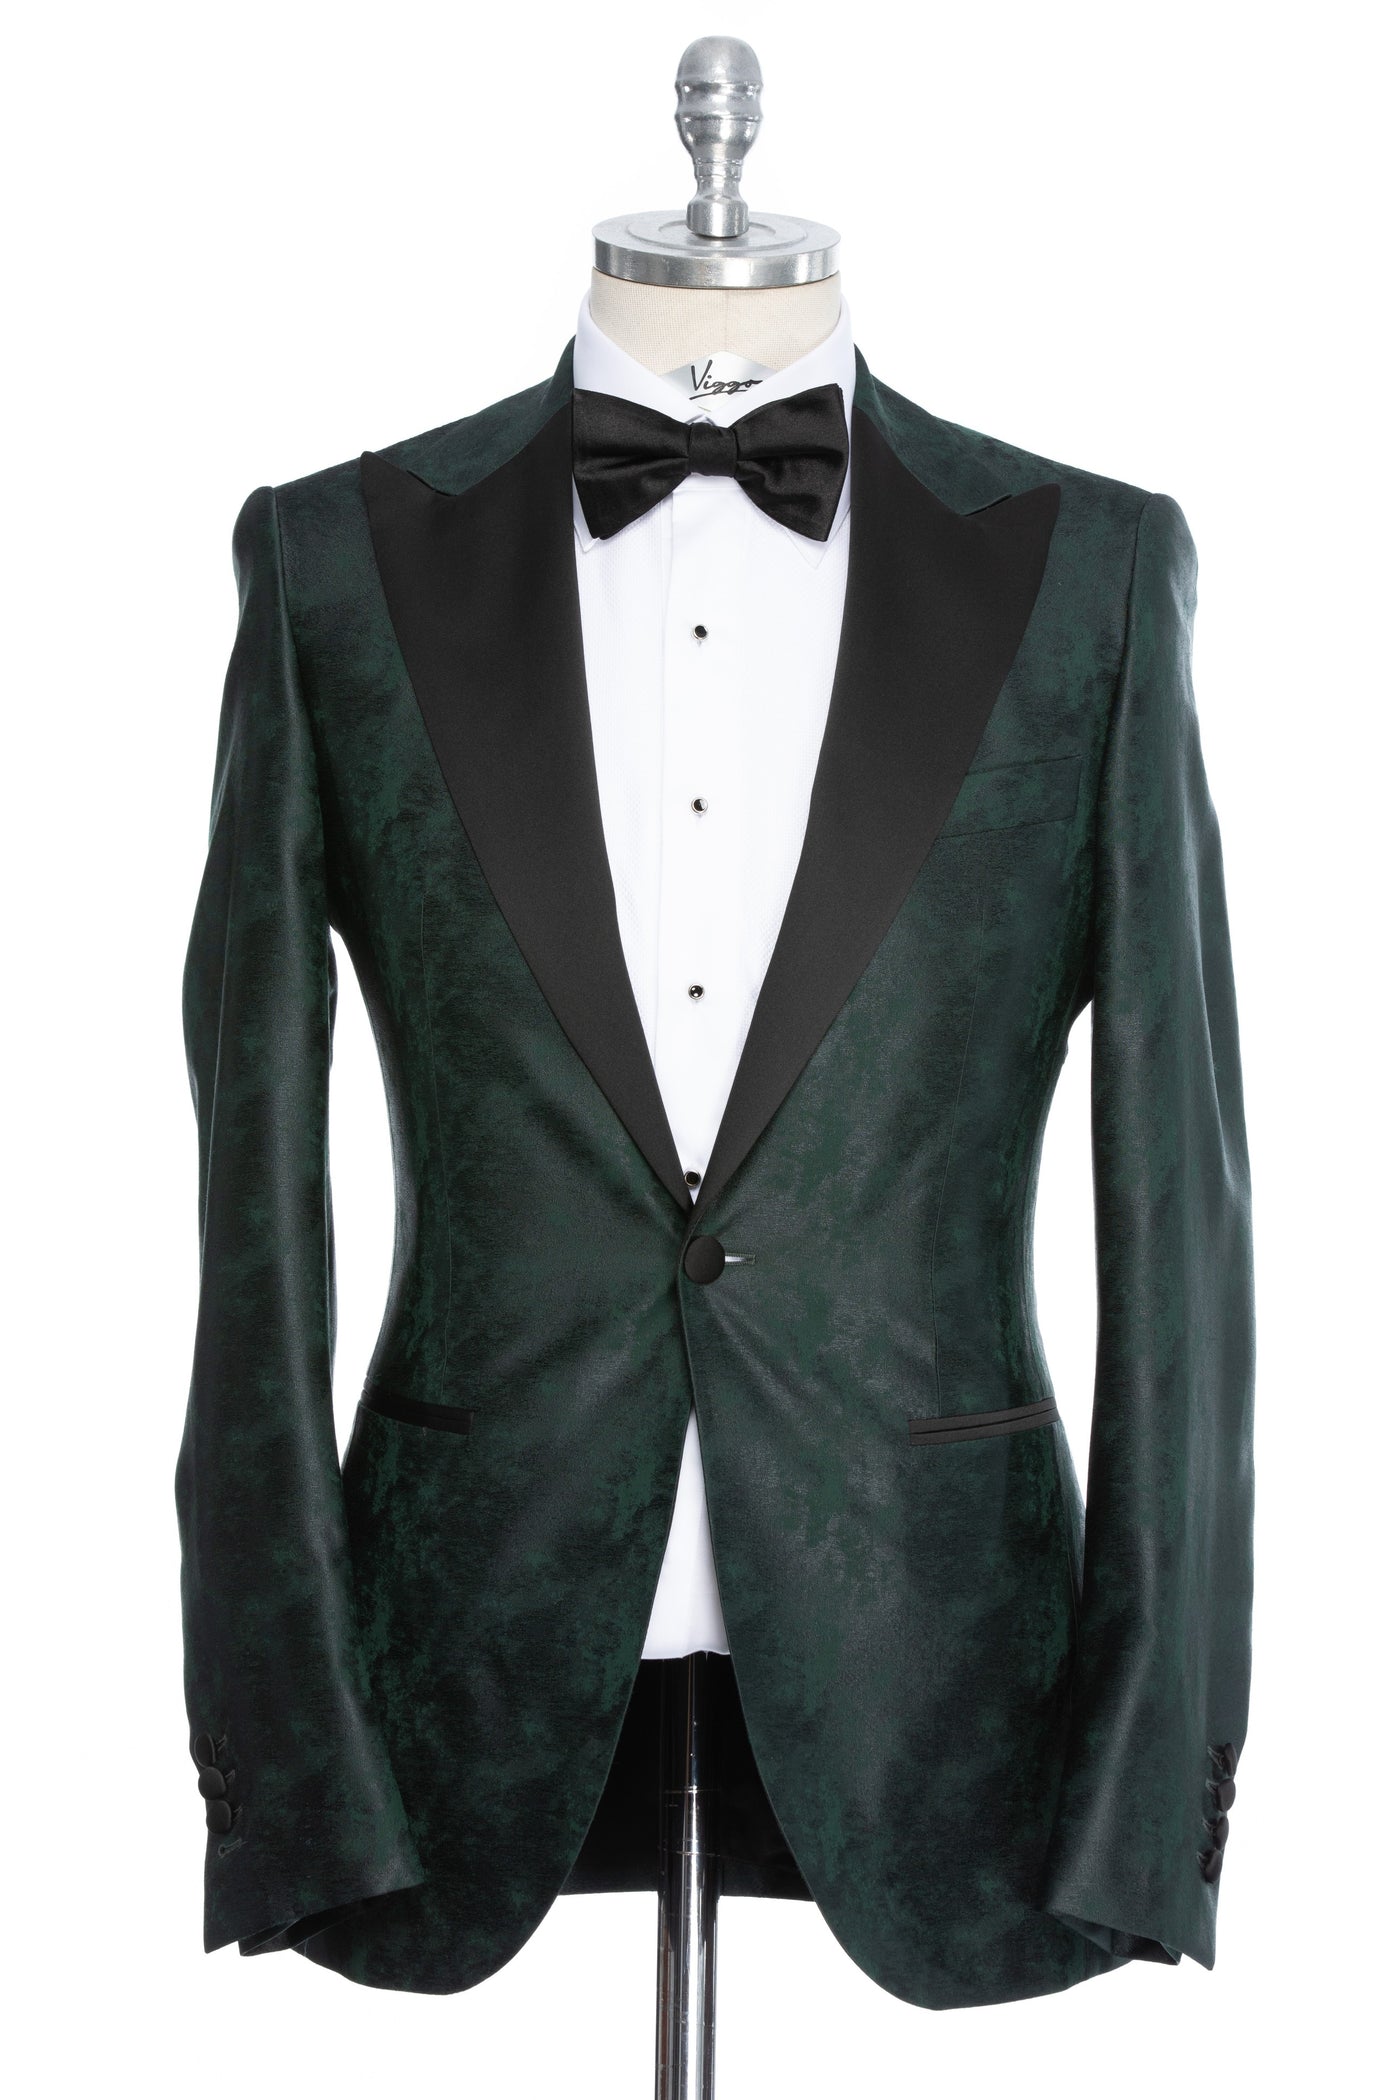 Green tuxedo jacket with contrasting lapel